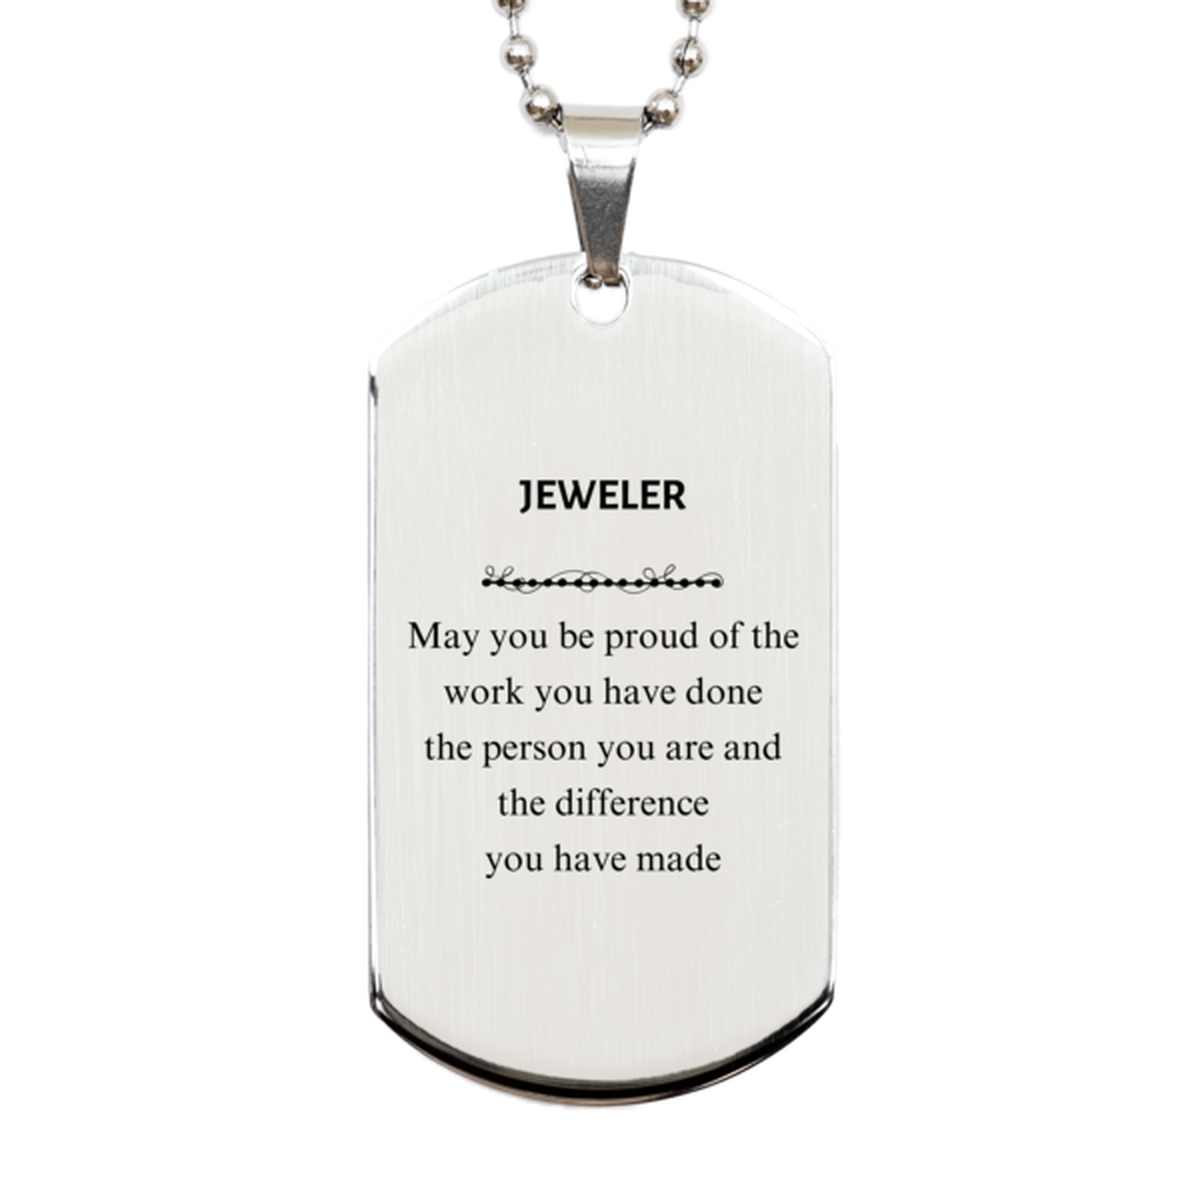 Jeweler May you be proud of the work you have done, Retirement Jeweler Silver Dog Tag for Colleague Appreciation Gifts Amazing for Jeweler